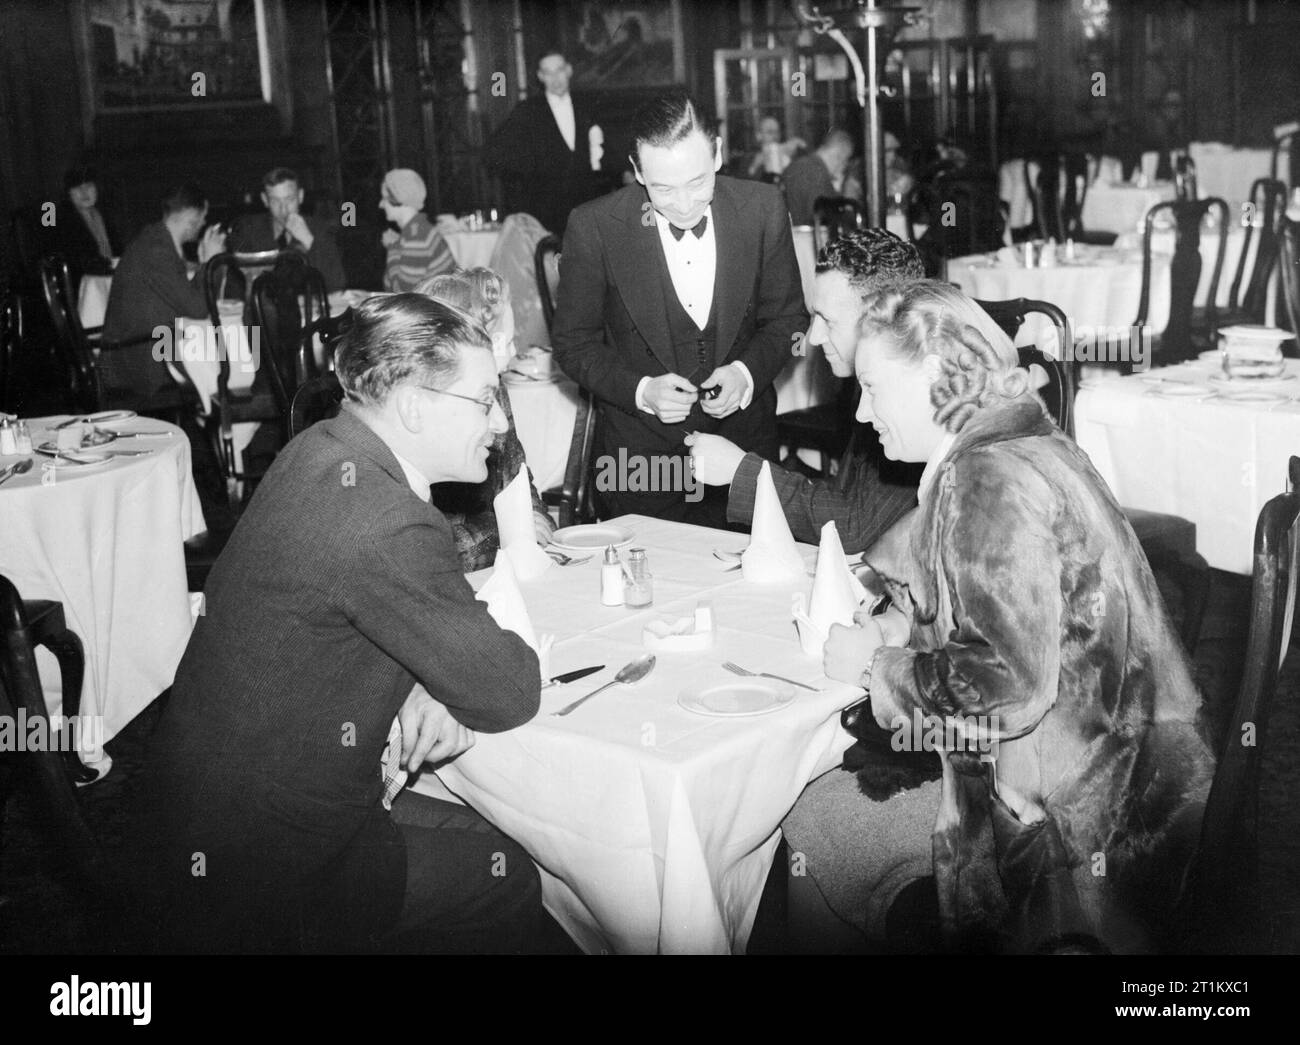 A group of diners give their order to the waiter at a restaurant in the West End of London, spring 1941. A group of four friends give their order to the waiter at this restaurant, somewhere in the West End of London. This restaurant is operating quite a luxurious service, with white table cloths and linen napkins visible on all the tables. Stock Photo